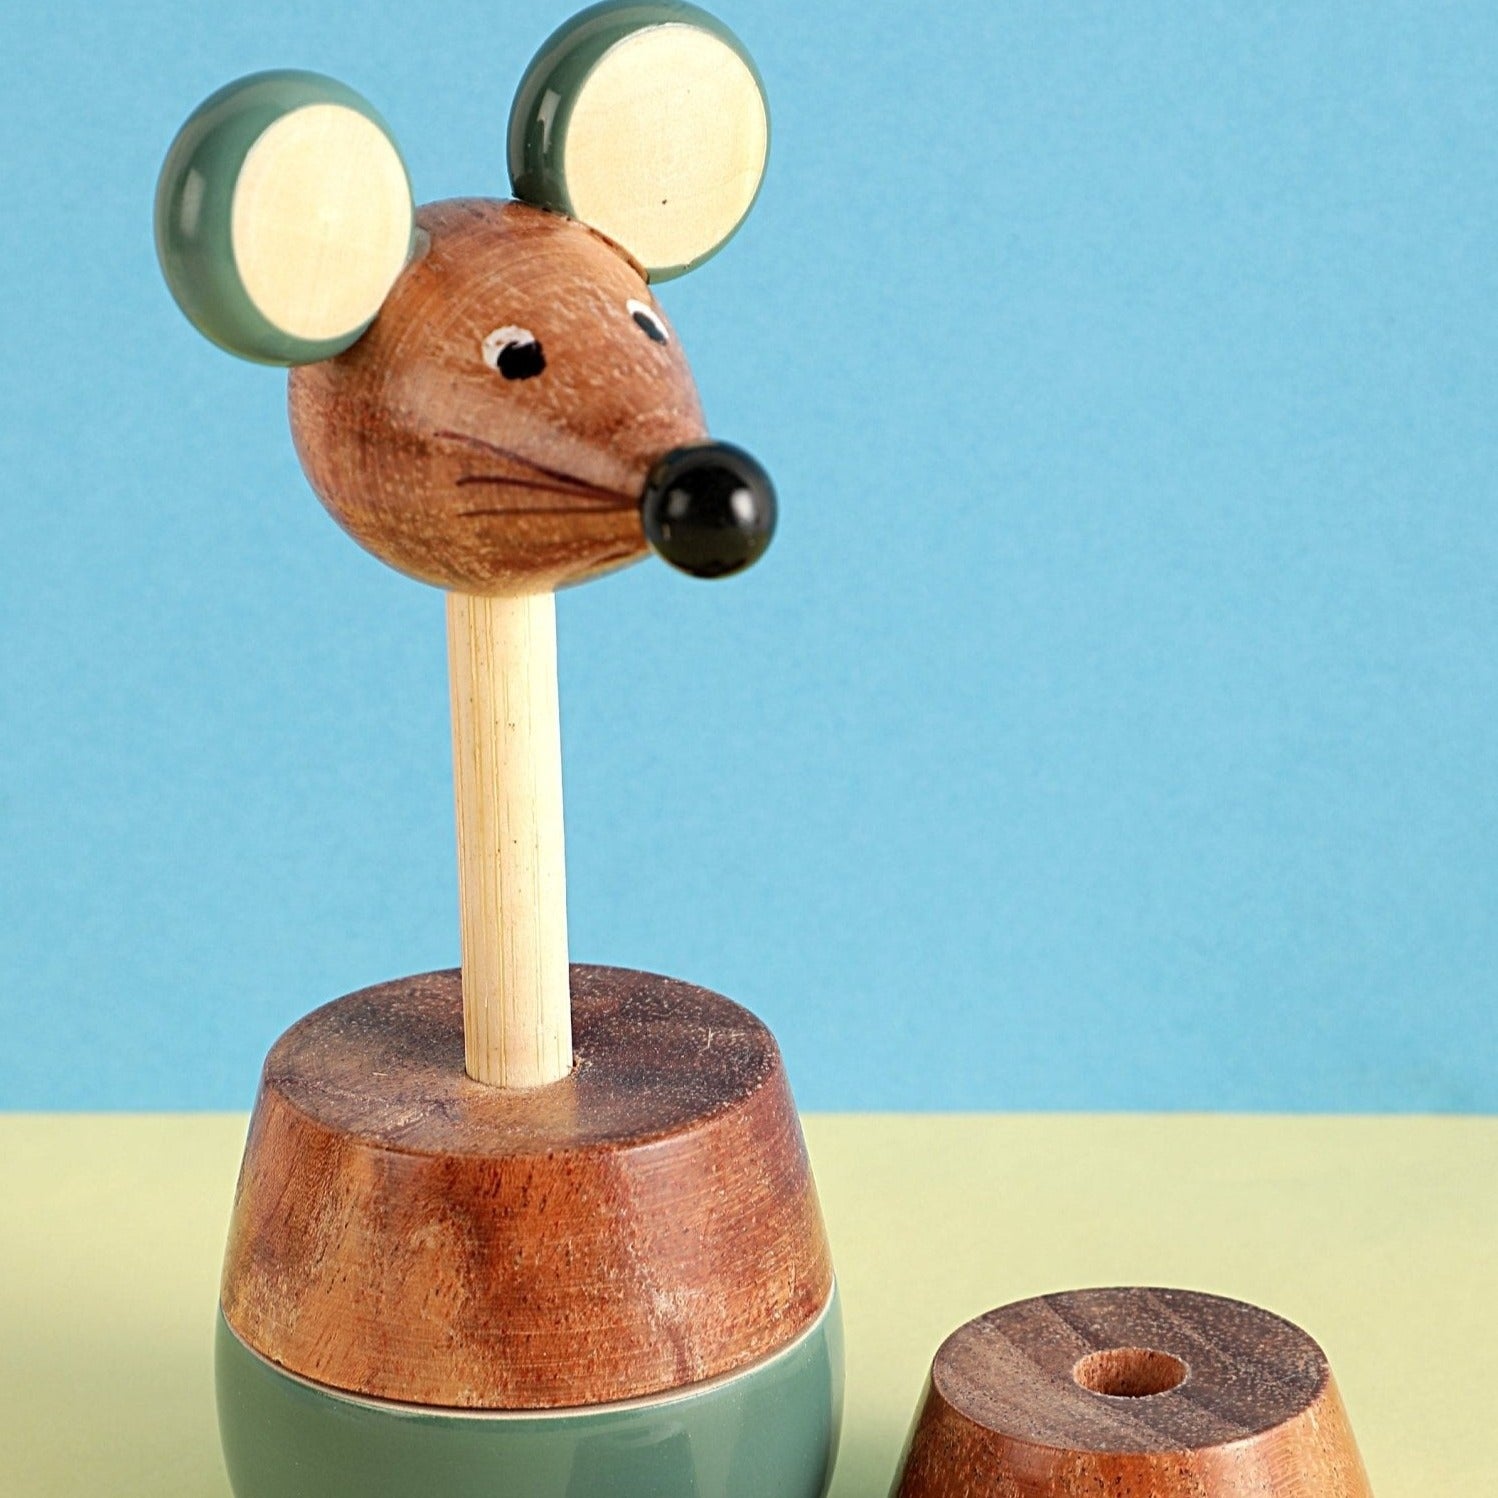 a wooden toy of a mouse on top of a table